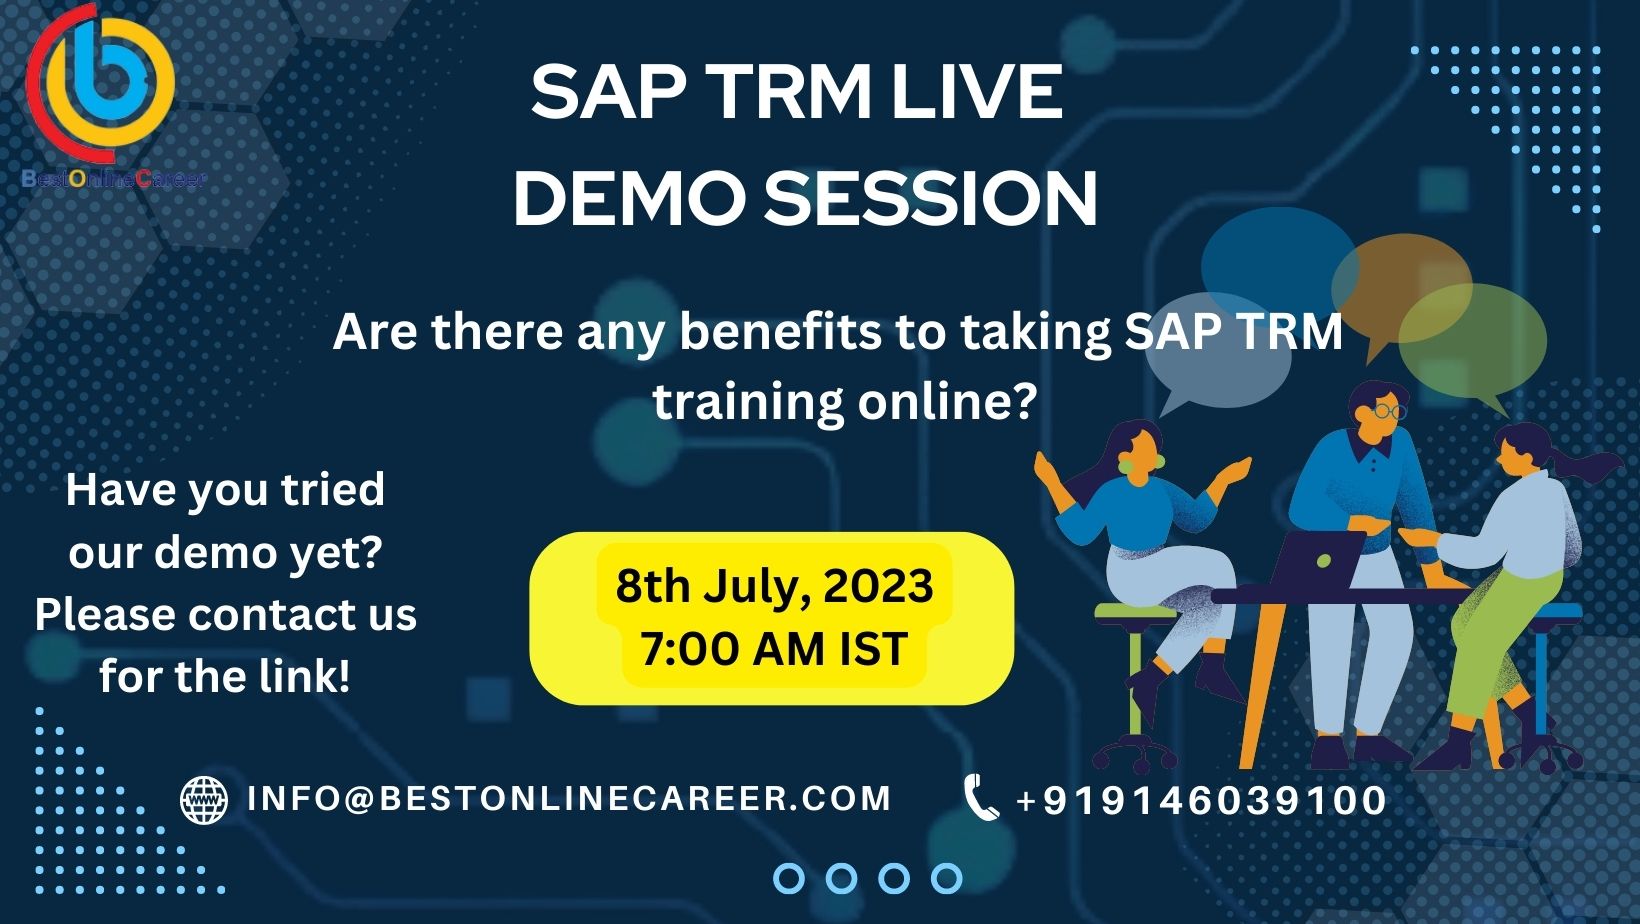 Online SAP TRM Training Courses Provided by Best Online Career, Online Event